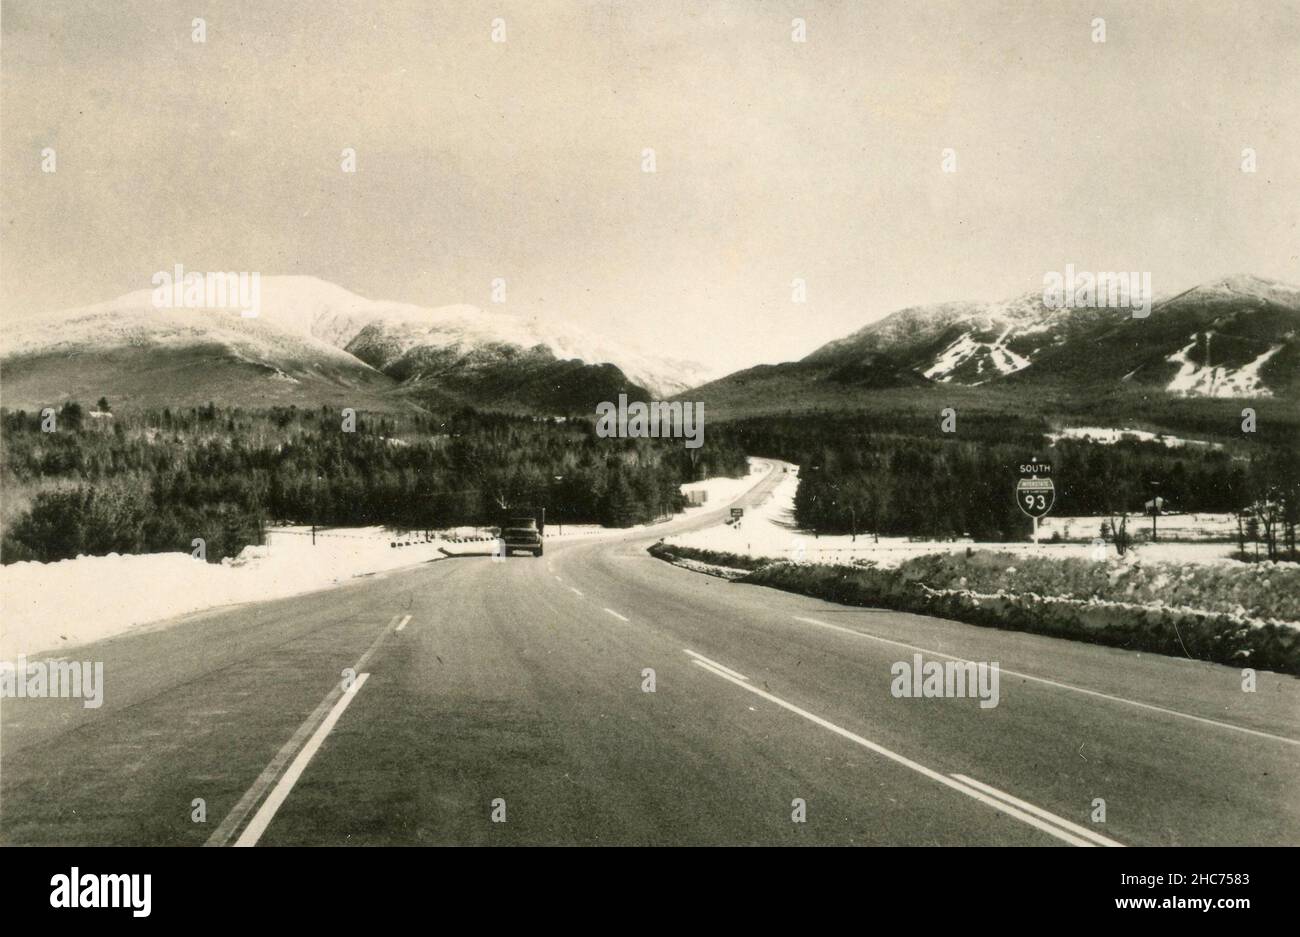 View of the White Mountains on the Interstate Highway 93, New Hempshire USA 1966 Stock Photo